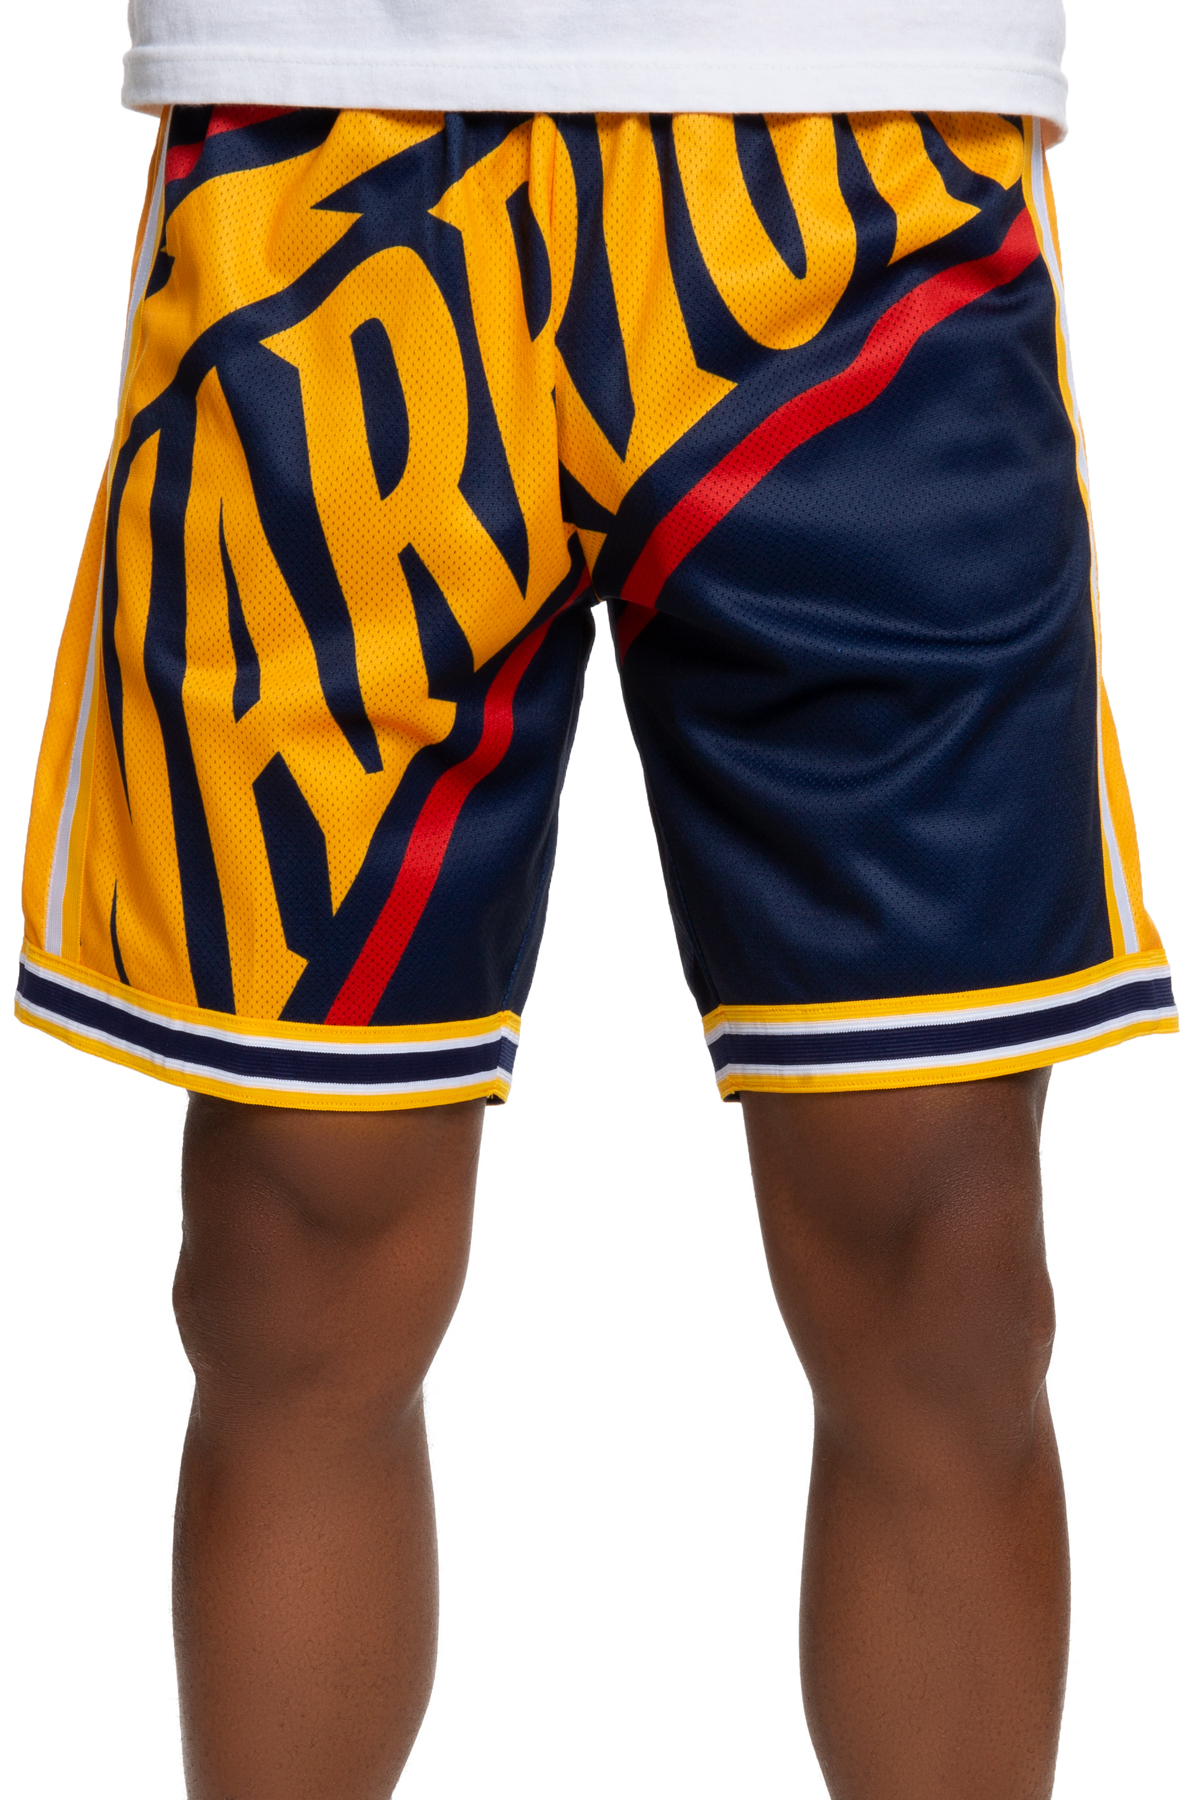 MITCHELL AND NESS Golden State Warriors Big Face Shorts